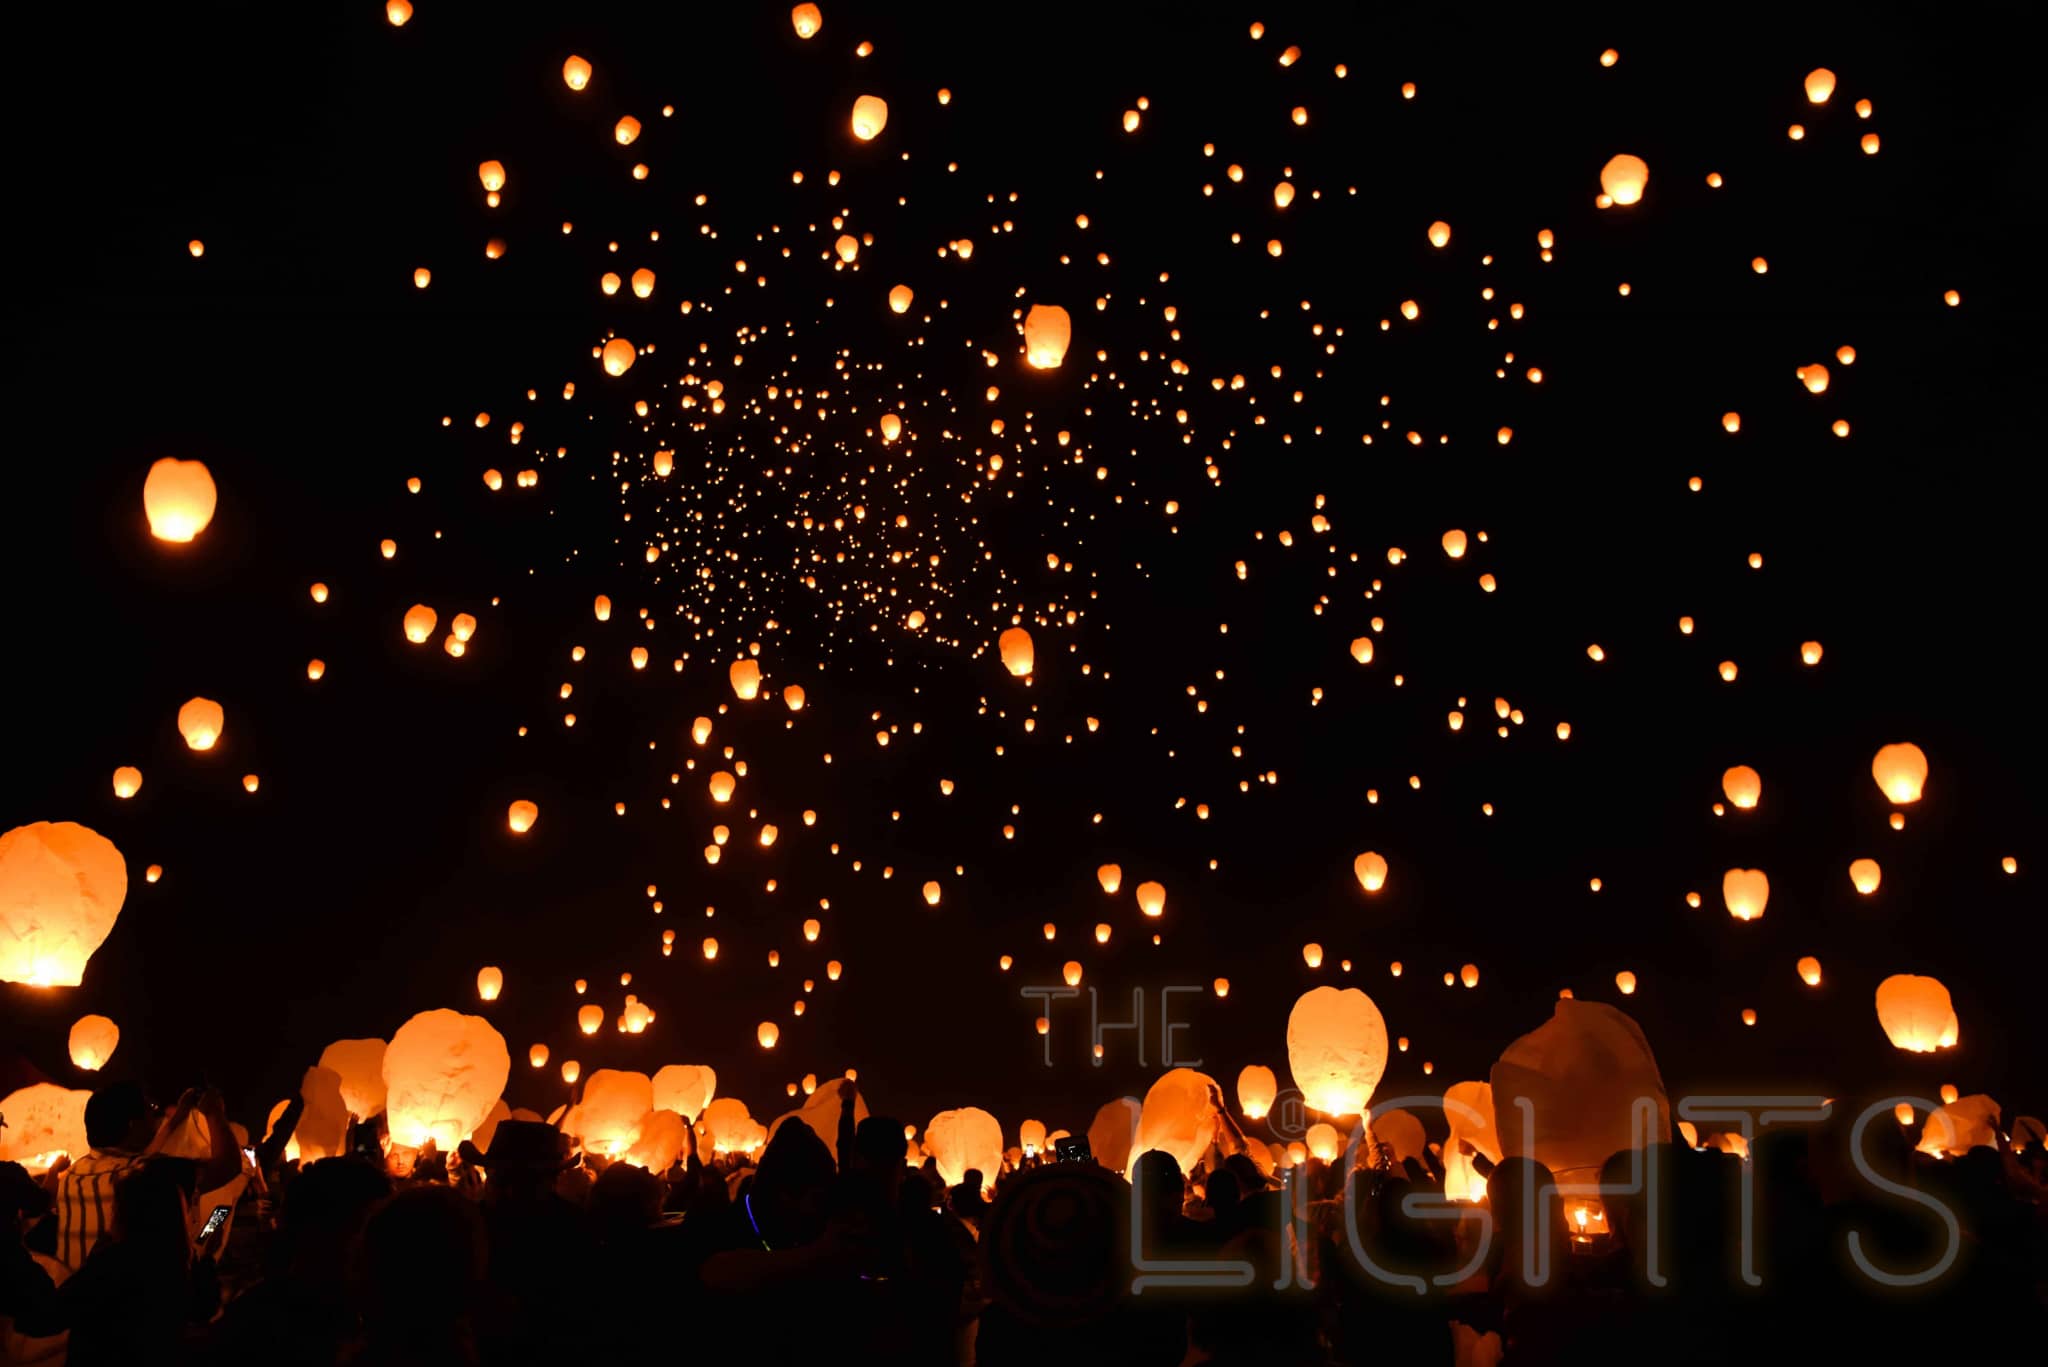 Thousands of lanterns are released into the air in unison with the personal wishes, dreams and goals of festival-goers below written on them. (Photo via The Lights Fest)